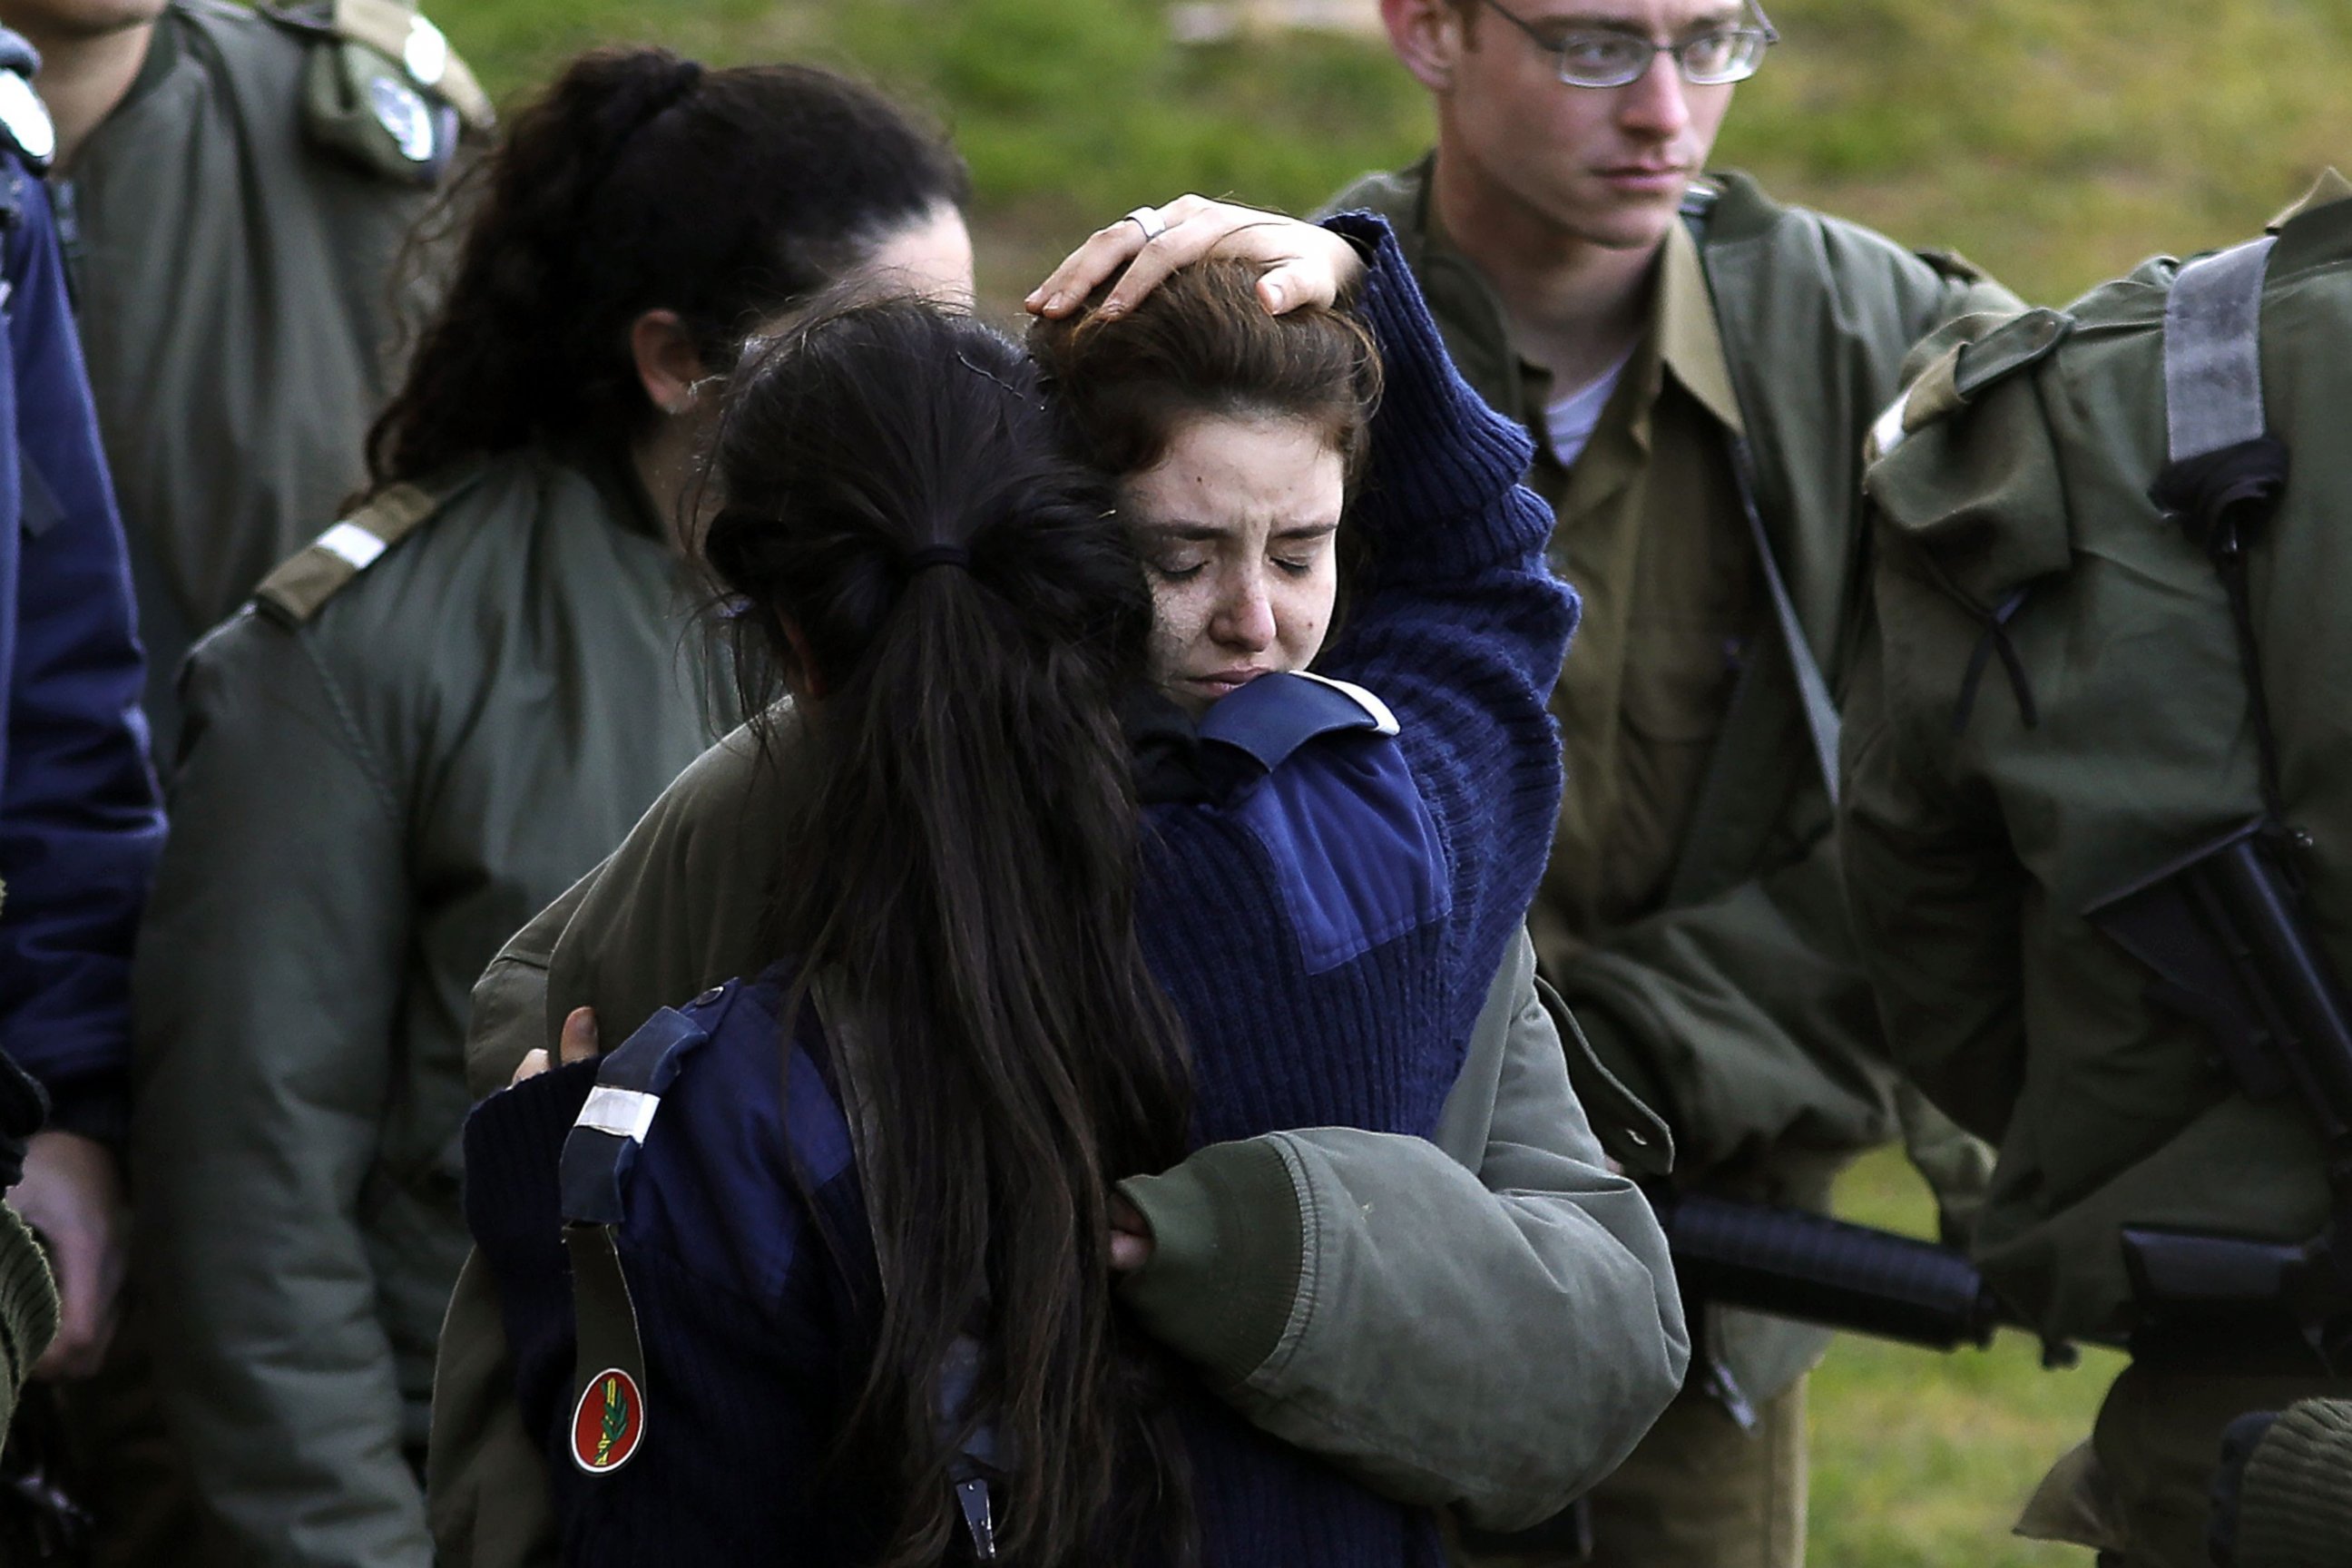 PHOTO: An Israeli soldier is consoled as she cries at the site of a vehicle-ramming attack in Jerusalem, Jan. 8, 2017.